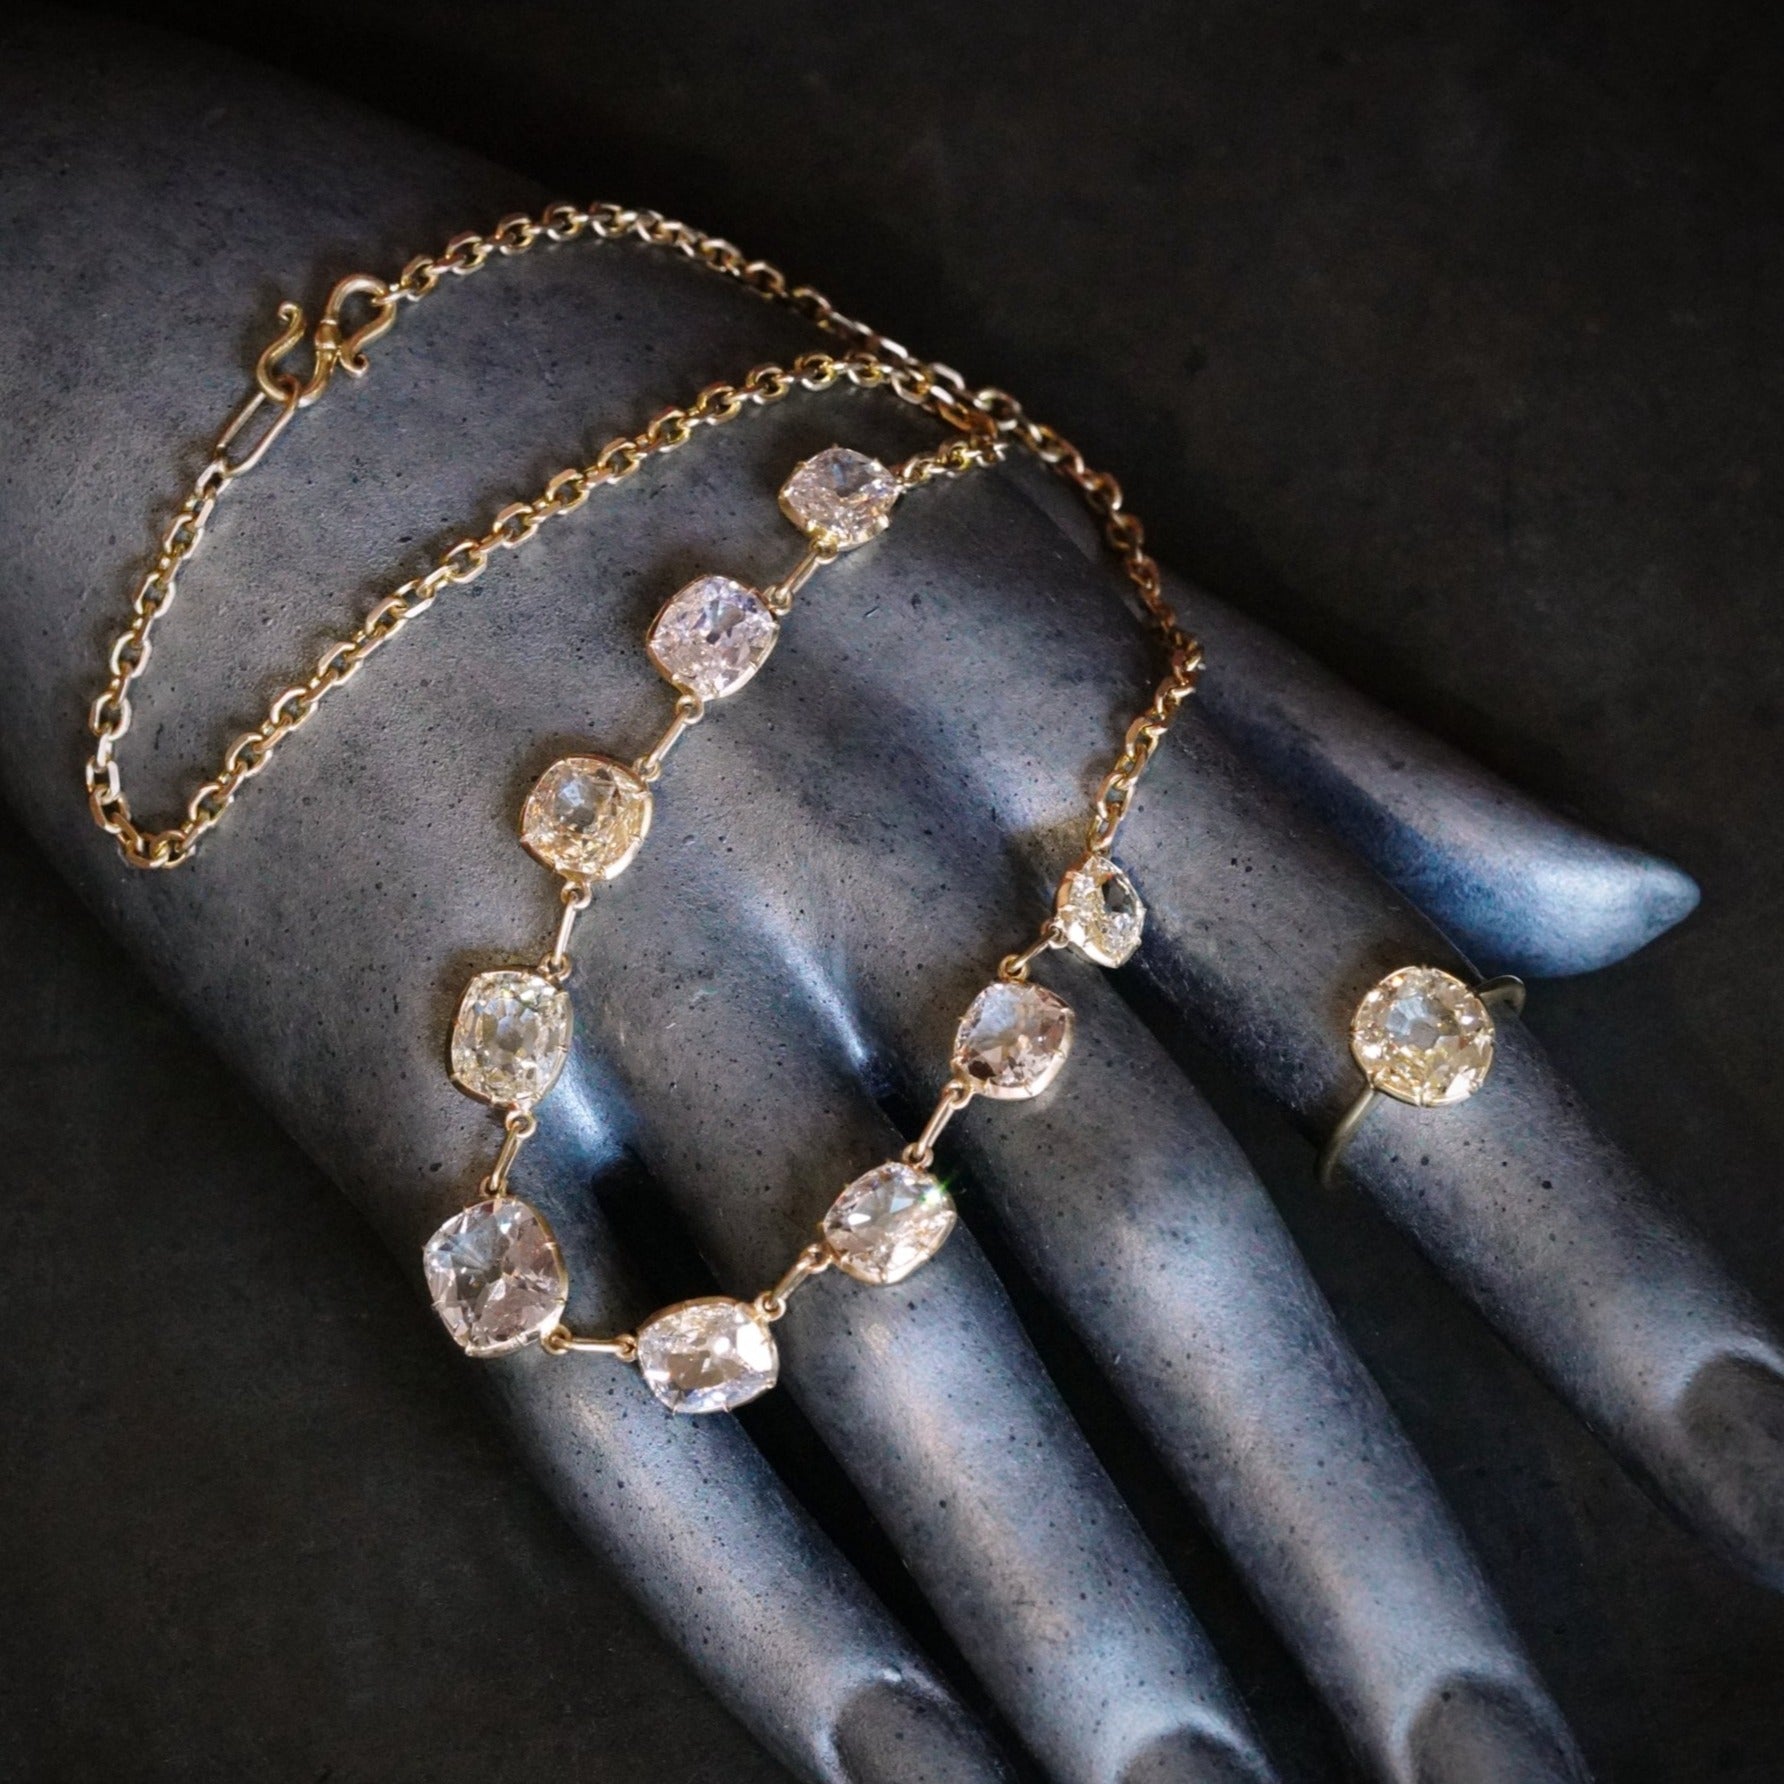 Victorian-Inspired Diamond Set Necklace & Ring